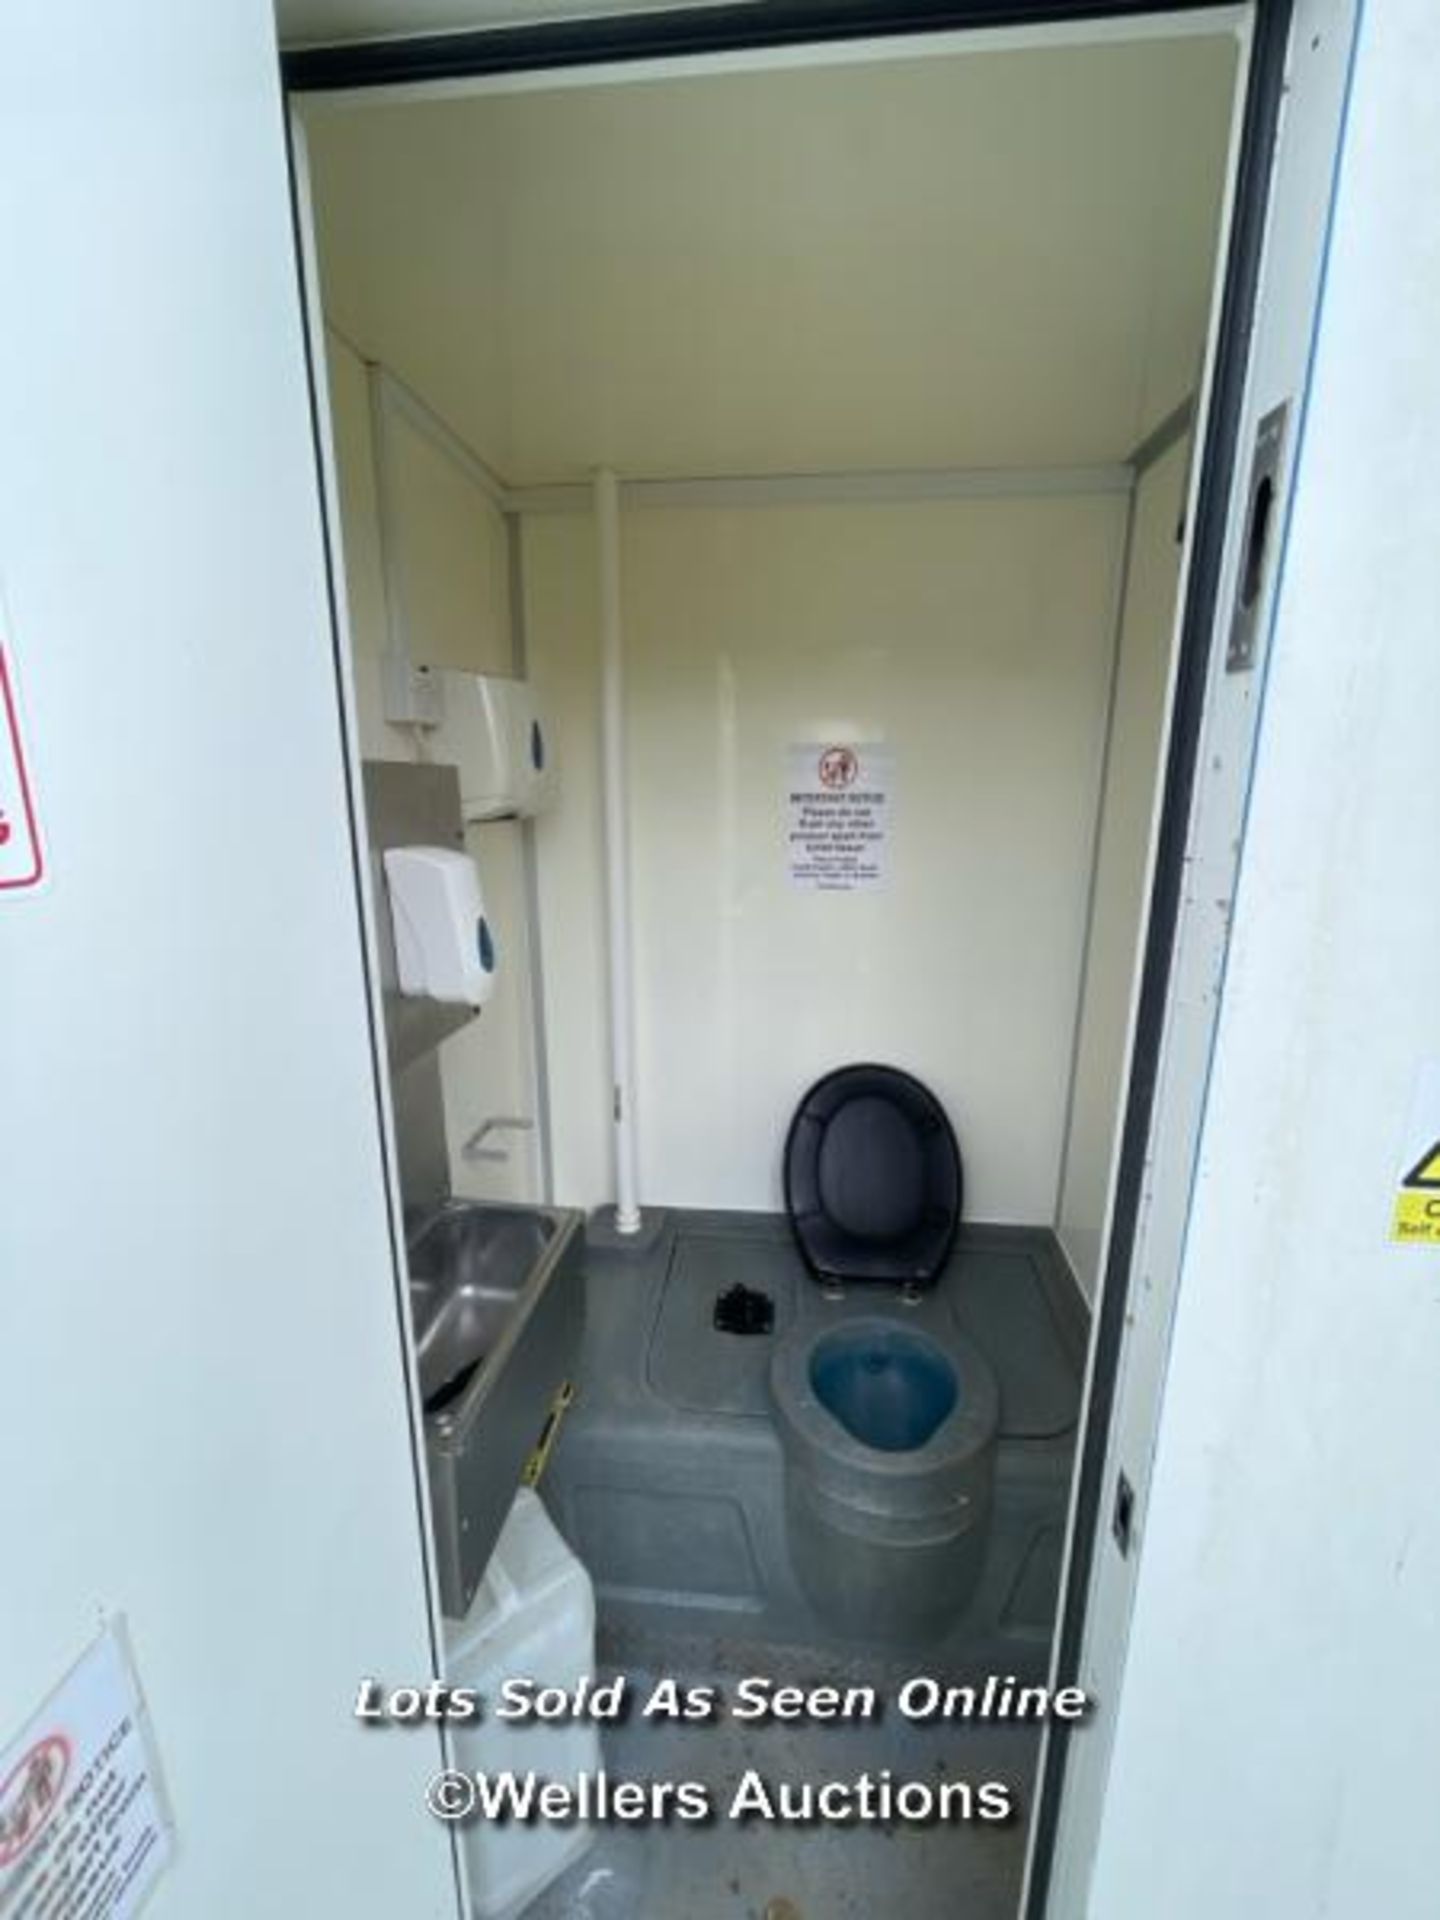 6 PERSON 12 X 7.5FT AJC EASY CABIN TOWABLE WELFARE UNIT, INCLUDES WASH BASIN, KETTLE, MICROWAVE, - Image 11 of 19